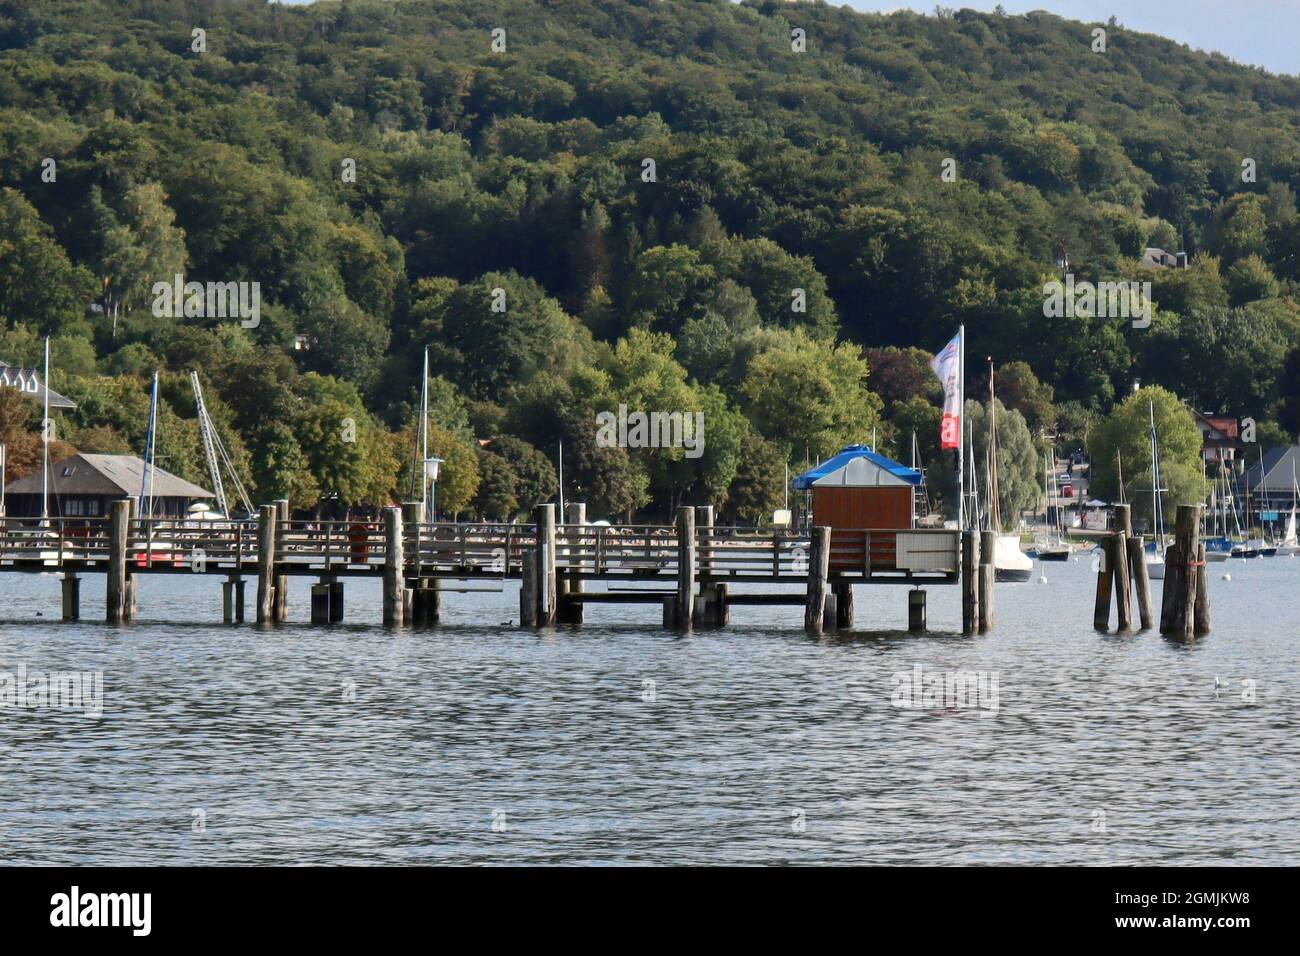 Wonderful views over the Ammersee Stock Photo